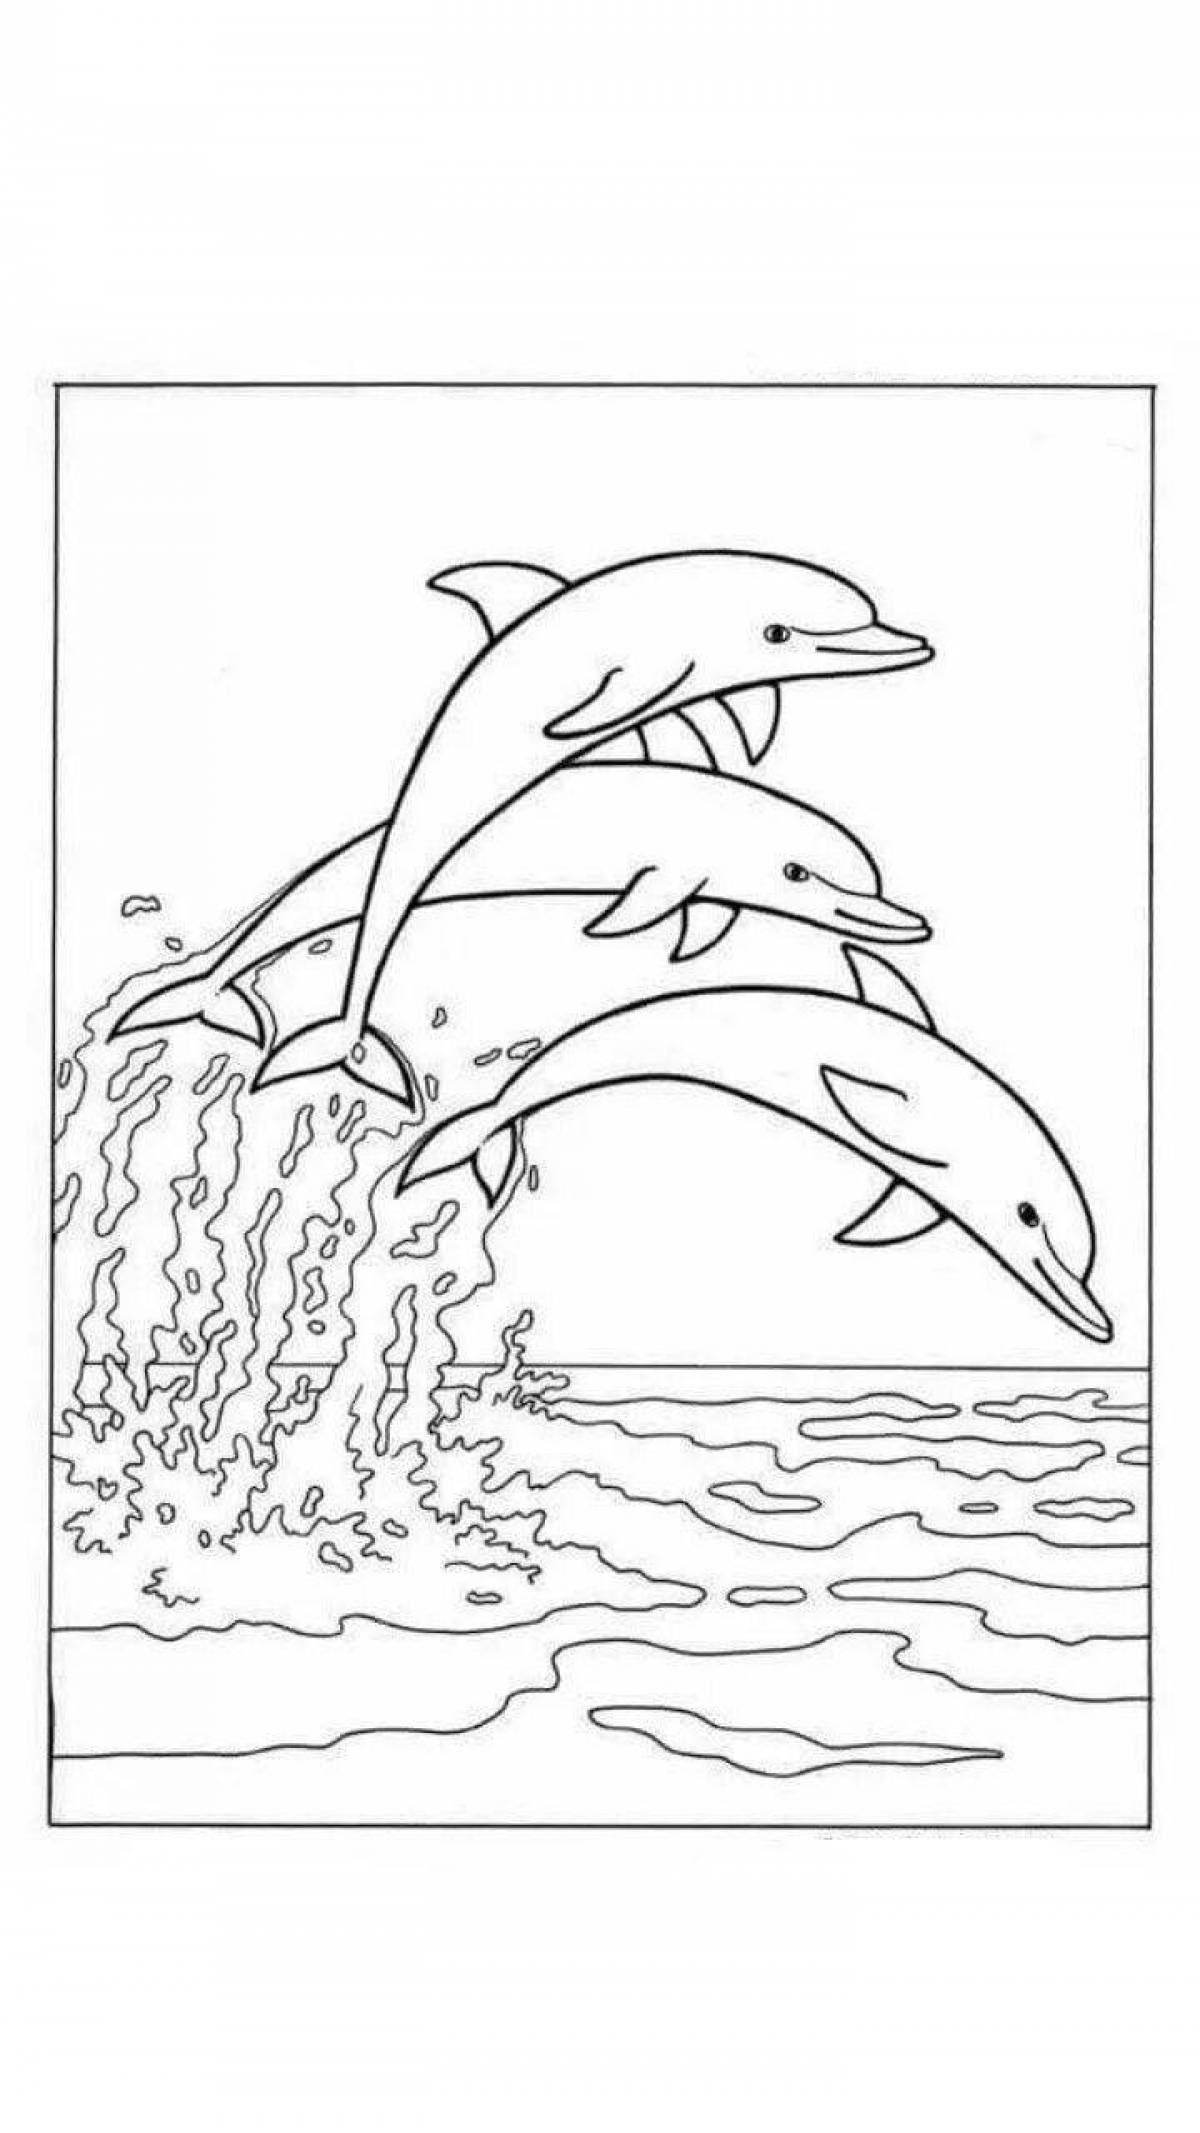 Fabulous ocean coloring page for kids